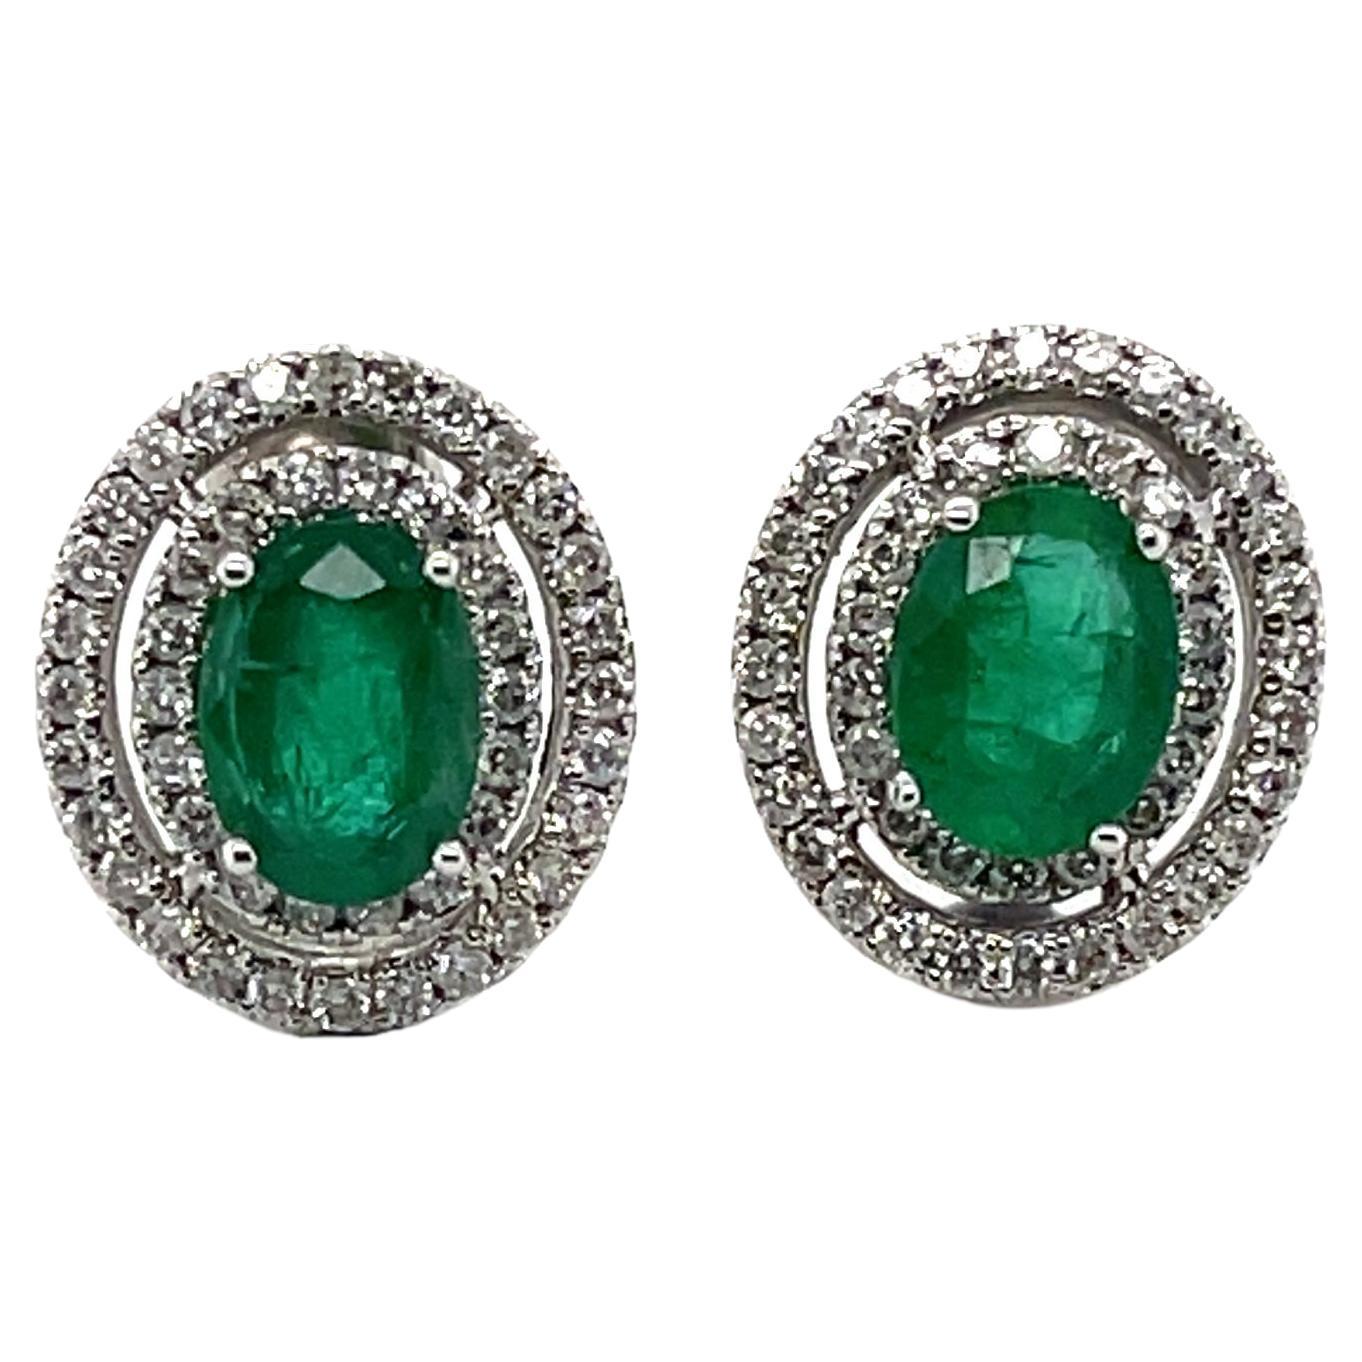 Imperial Jewels 18ct White Gold Emerald and Diamond Stud Earrings